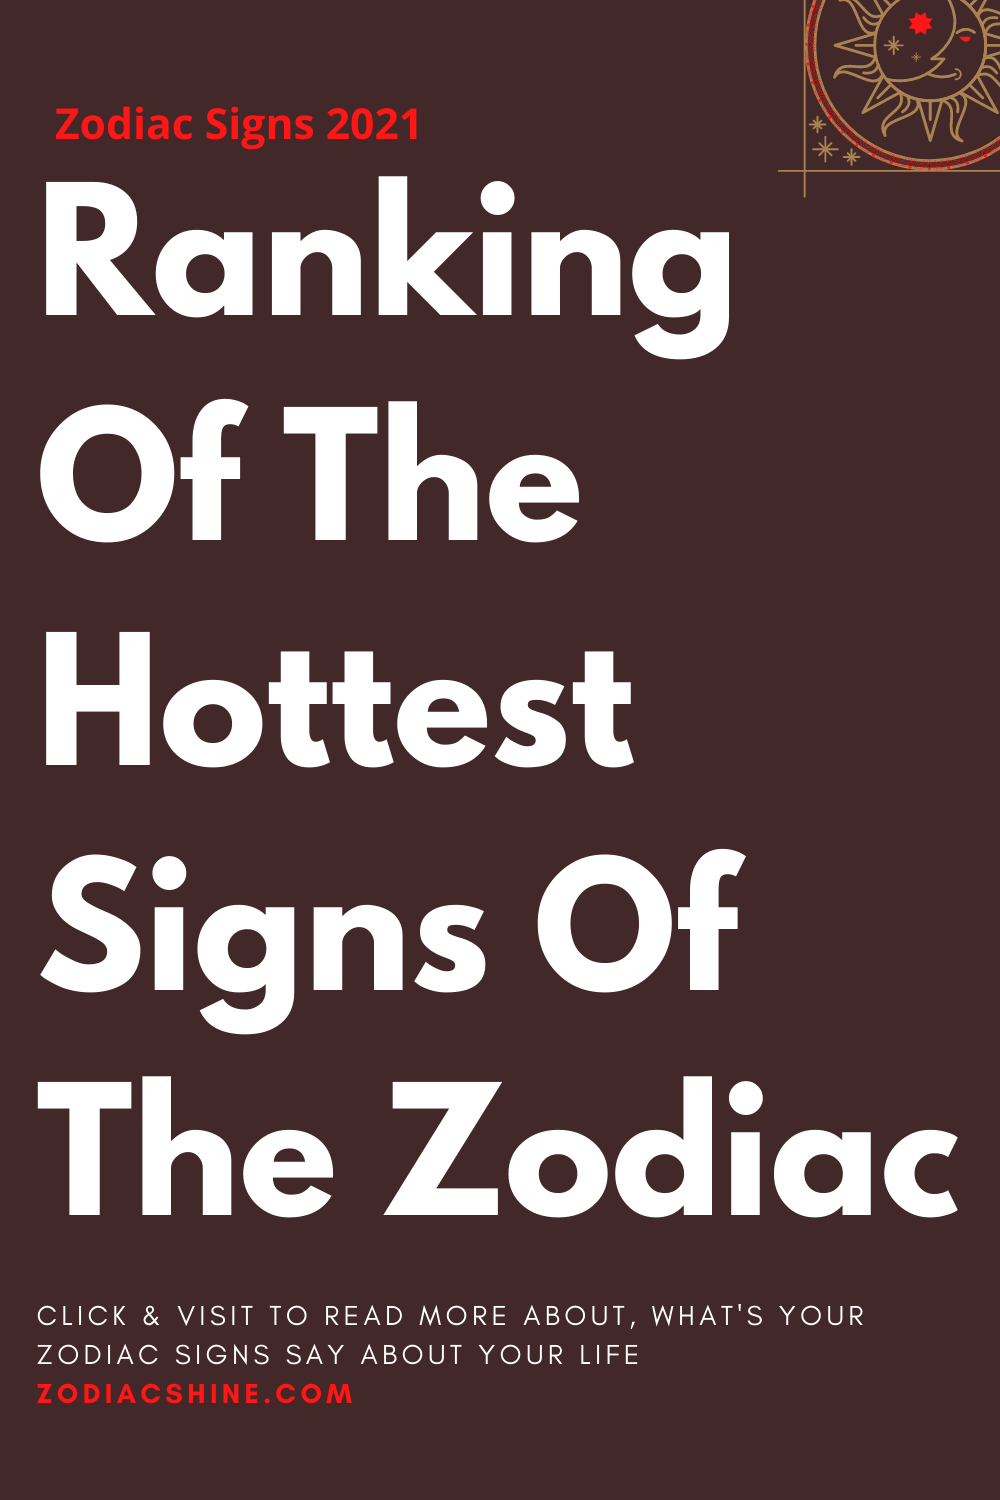 Ranking Of The Tropical Signs Of The Zodiac